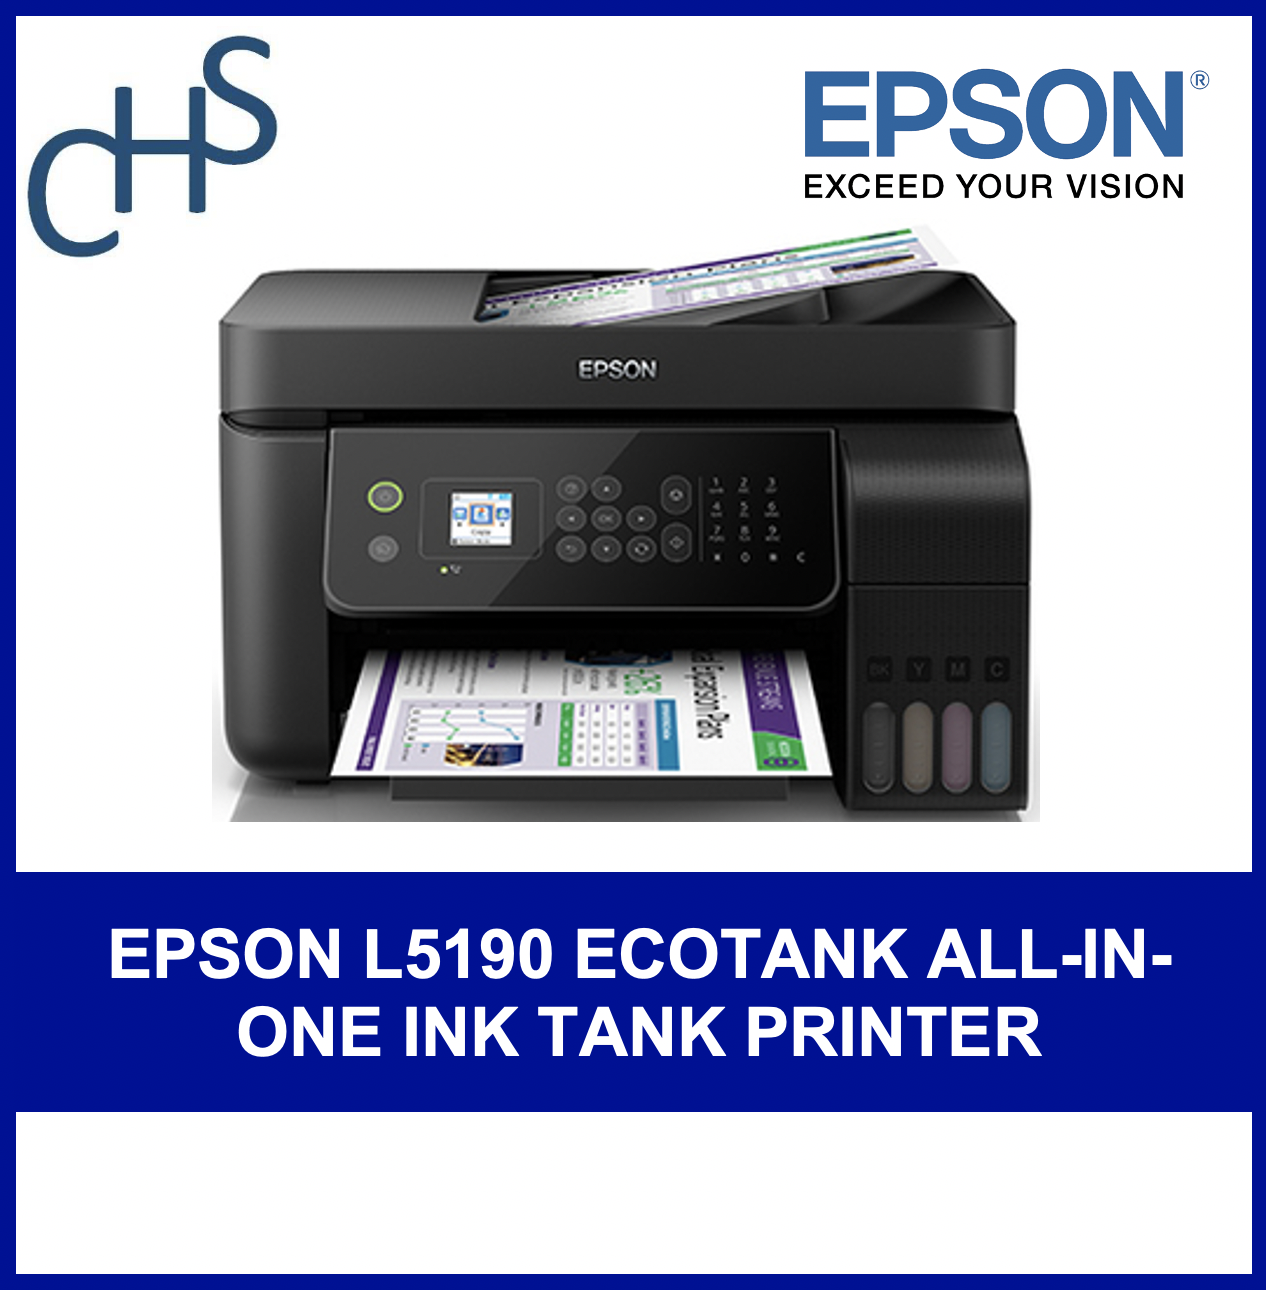 epson iprint for mac